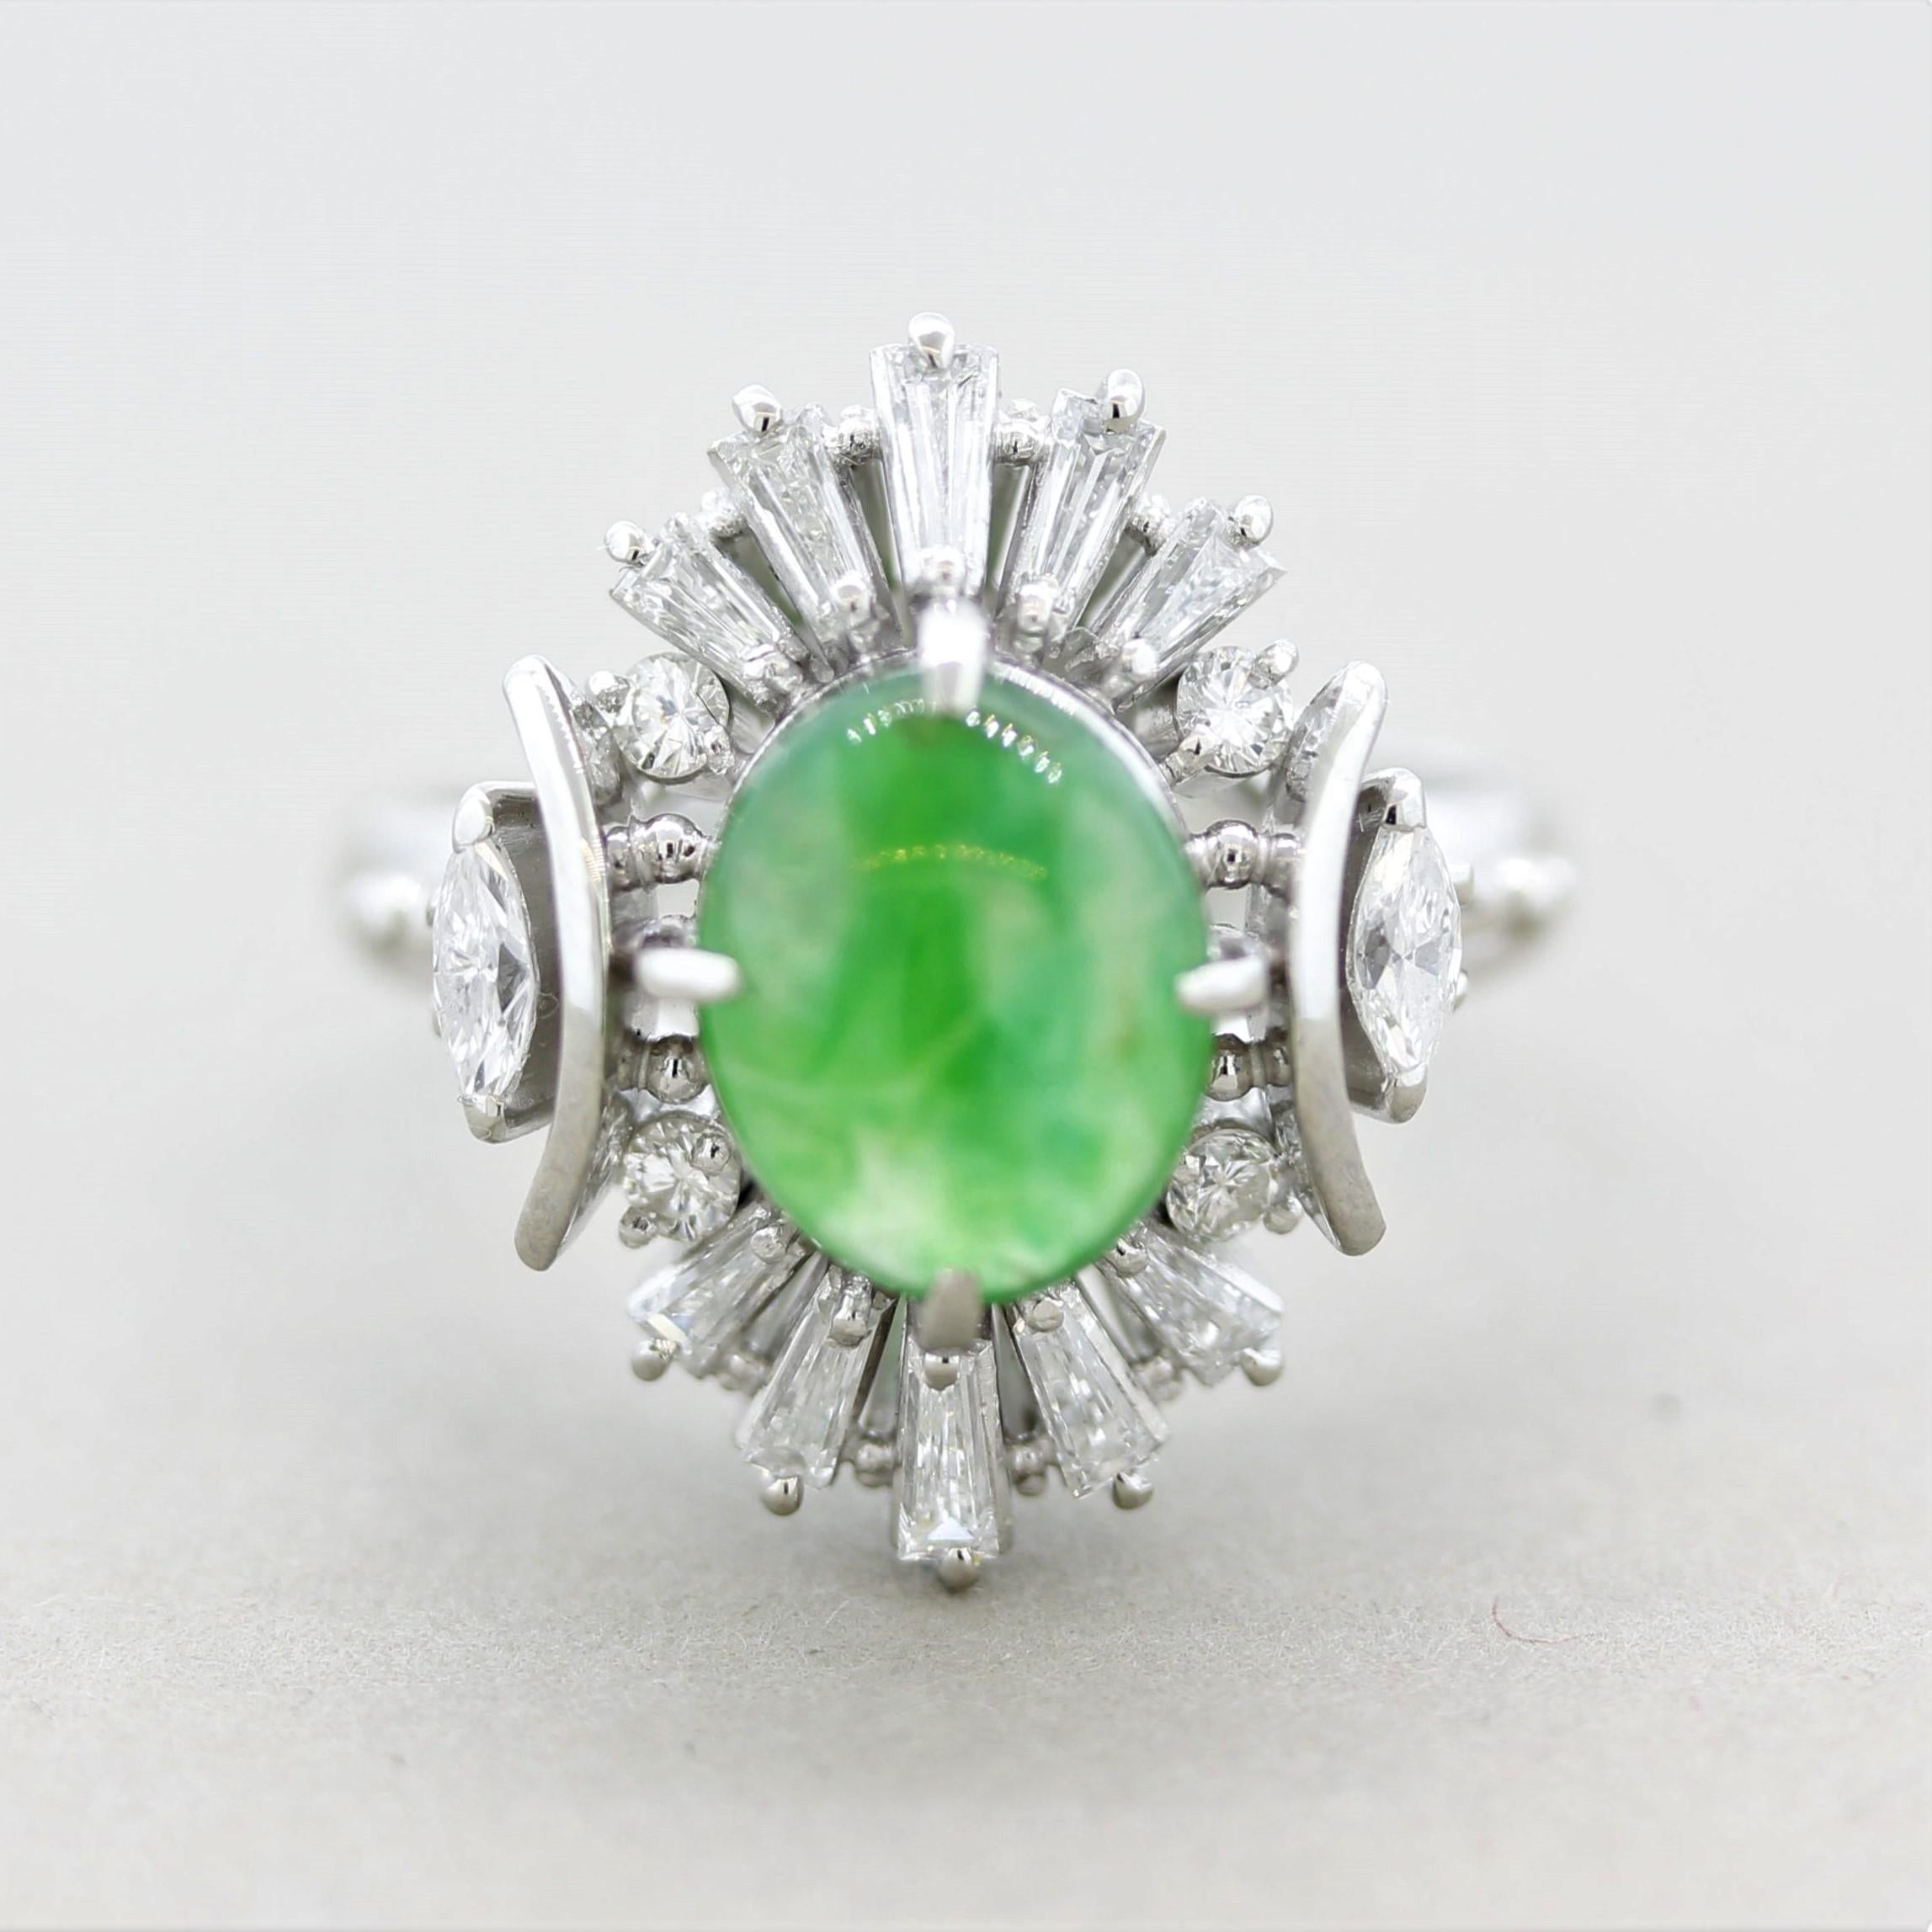 A stylish platinum ring featuring an approximately 2.00 carat piece of natural jadeite jade. It has a bright green color and is translucent allowing light to enter and exit the stone making it appear to glow. It is accented by 0.67 carats of round